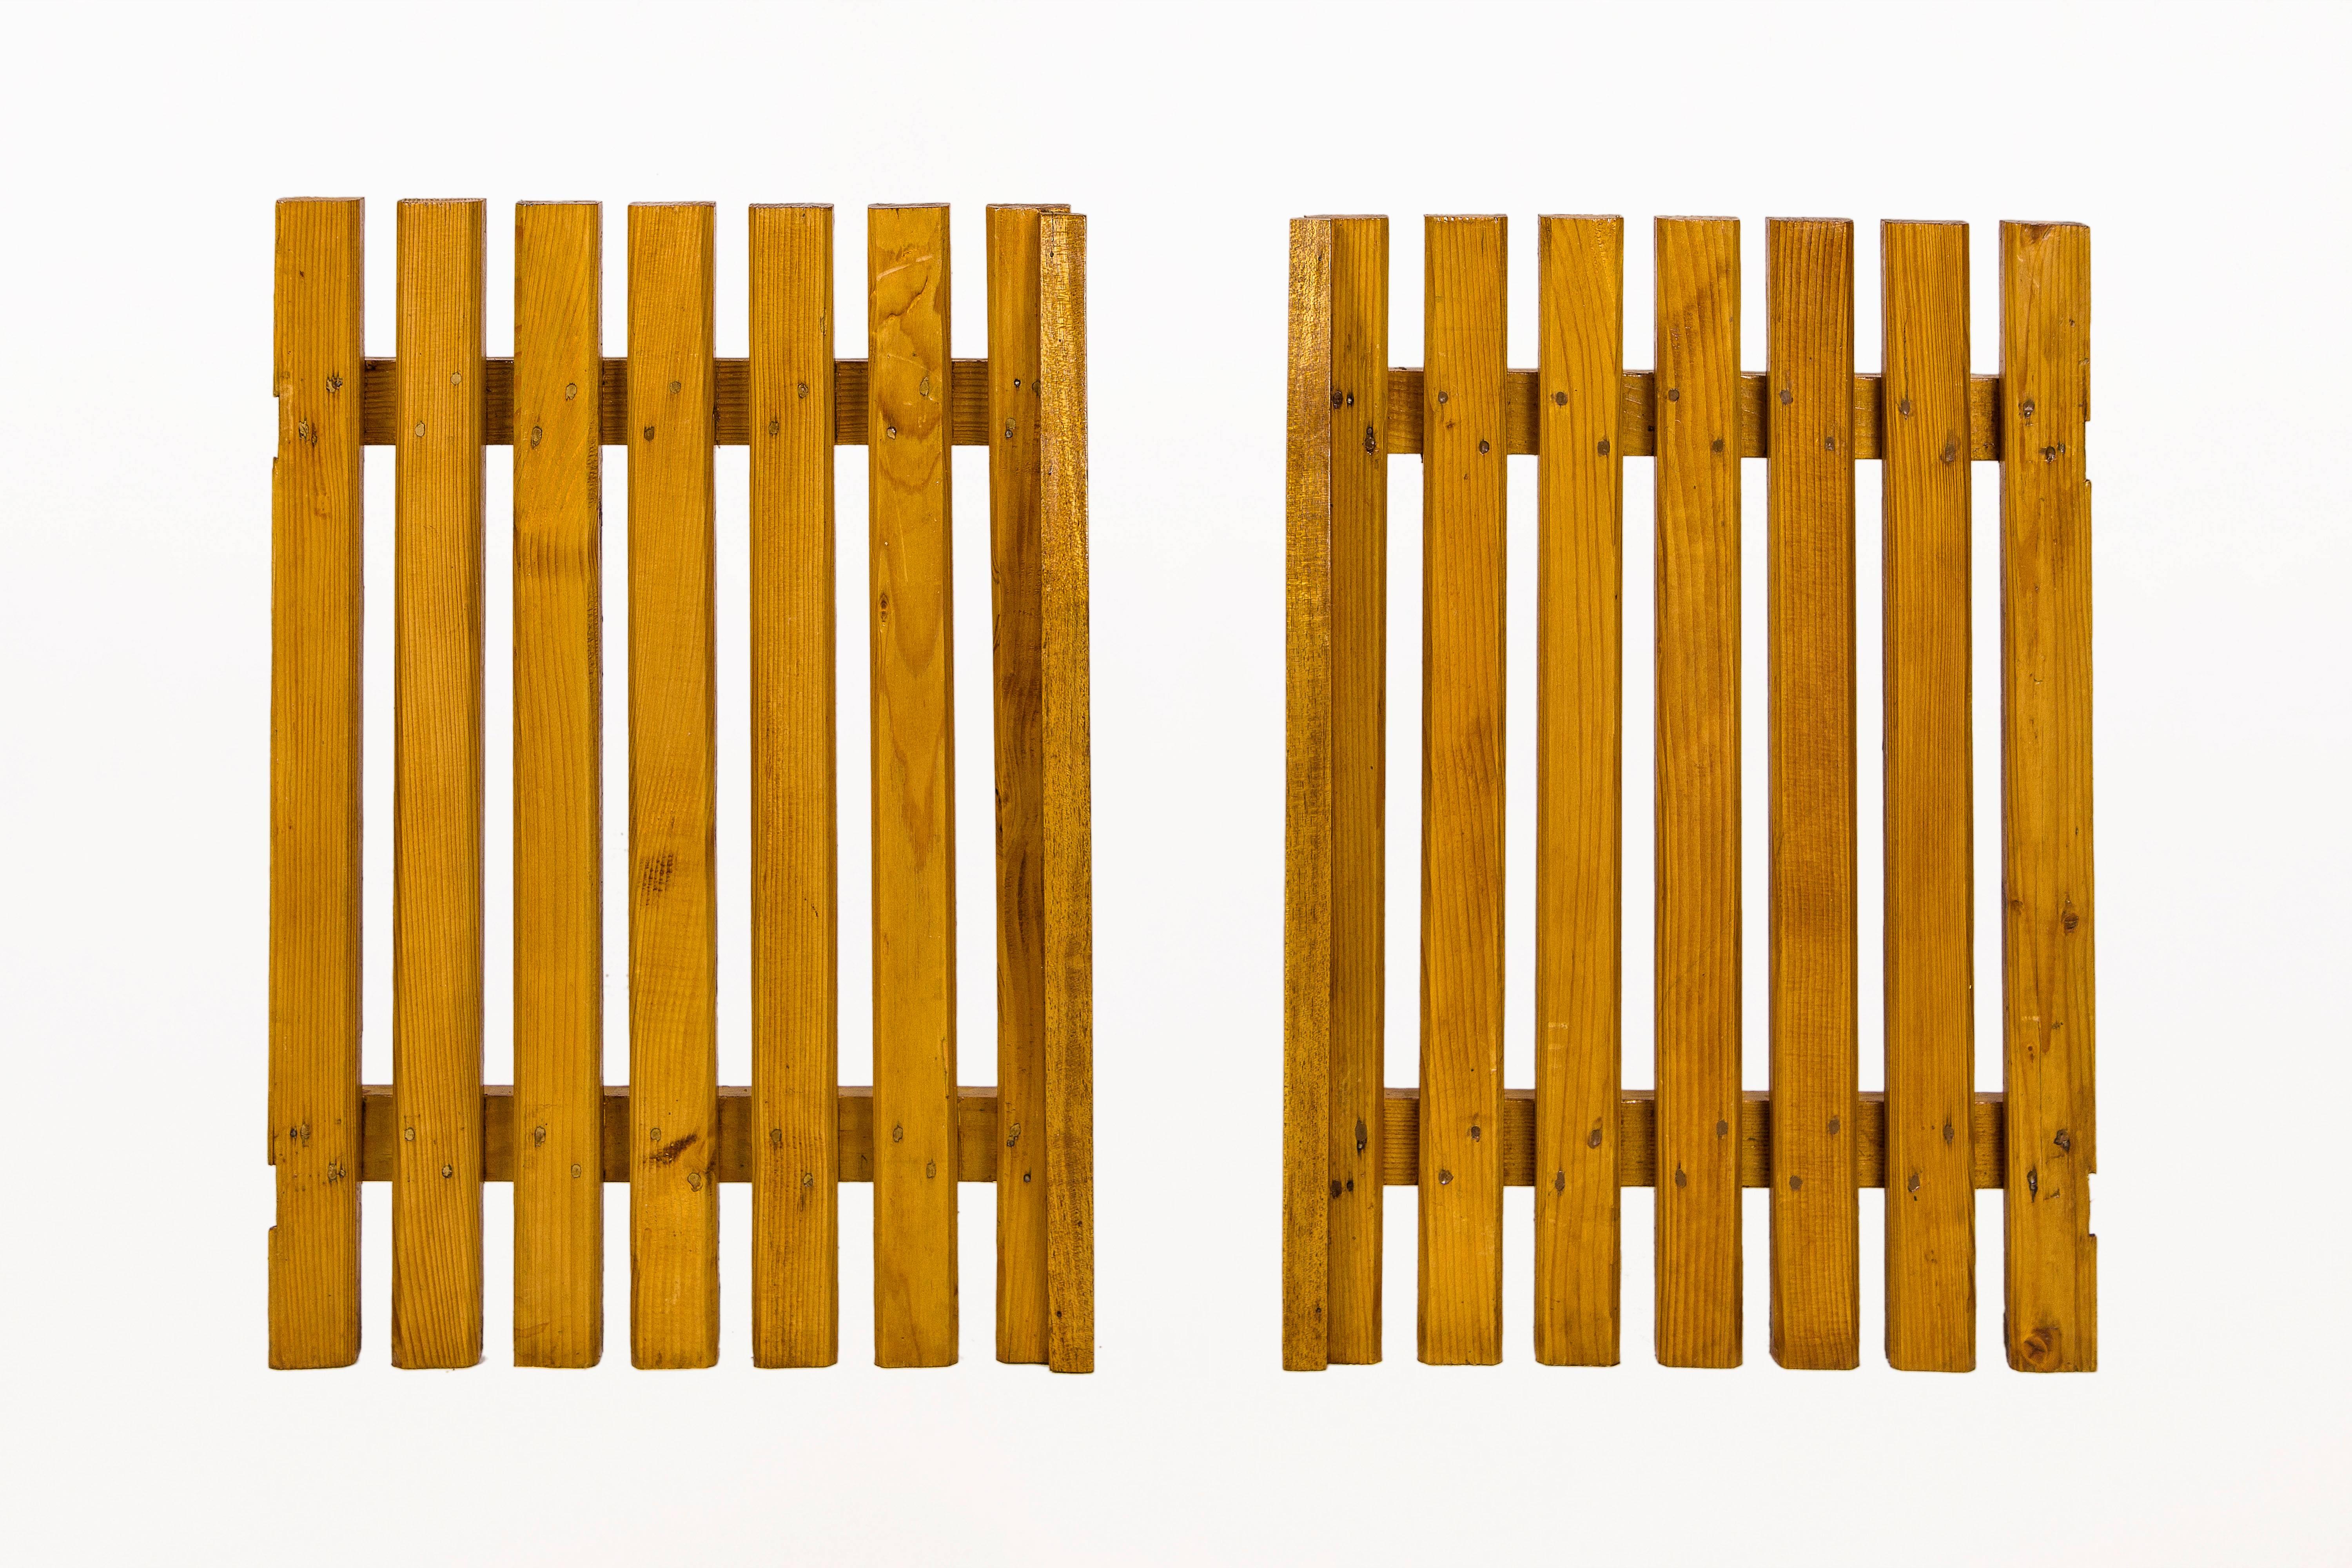 Set of four pairs of Charlotte Perriand small slat doors
Hisotry: Le Courboulay Building, Le Mans, France
Provenance: Gallery Clément Cidivino
circa 1950, France
Very good vintage condition.